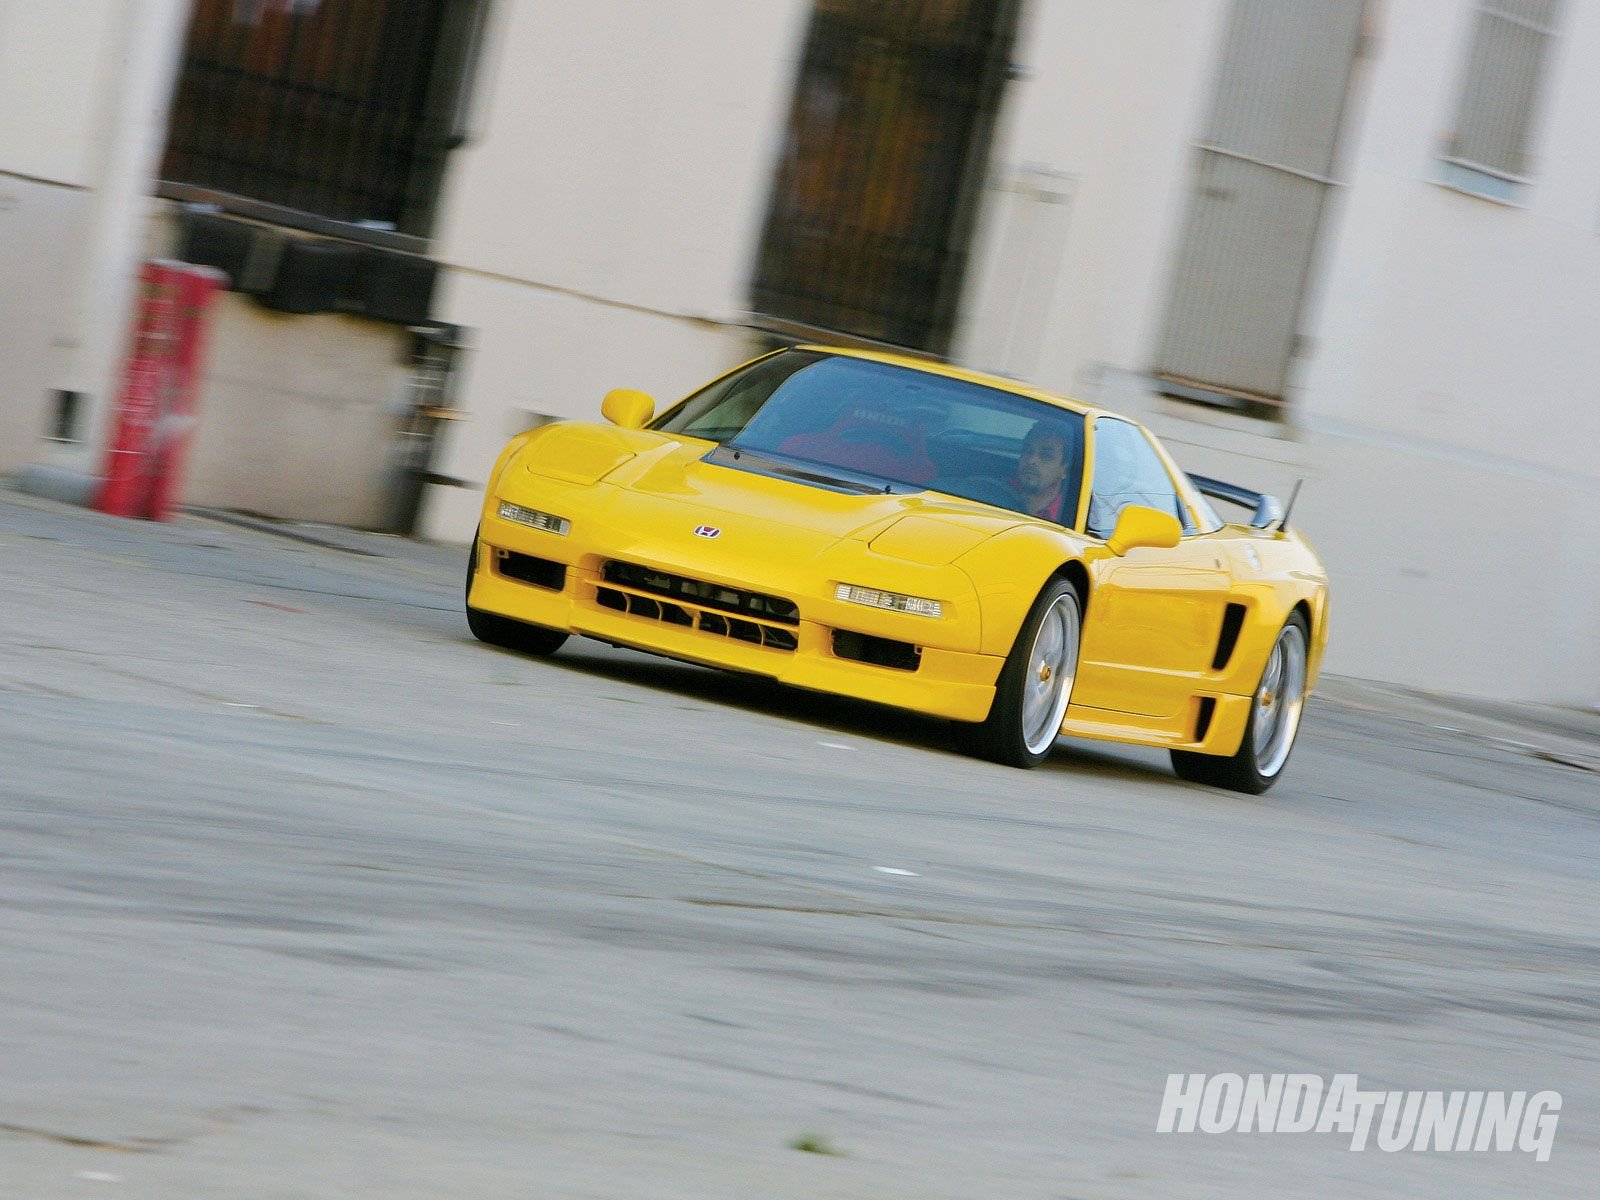 acura, Nsx, Cars, Coupe, Modified Wallpaper